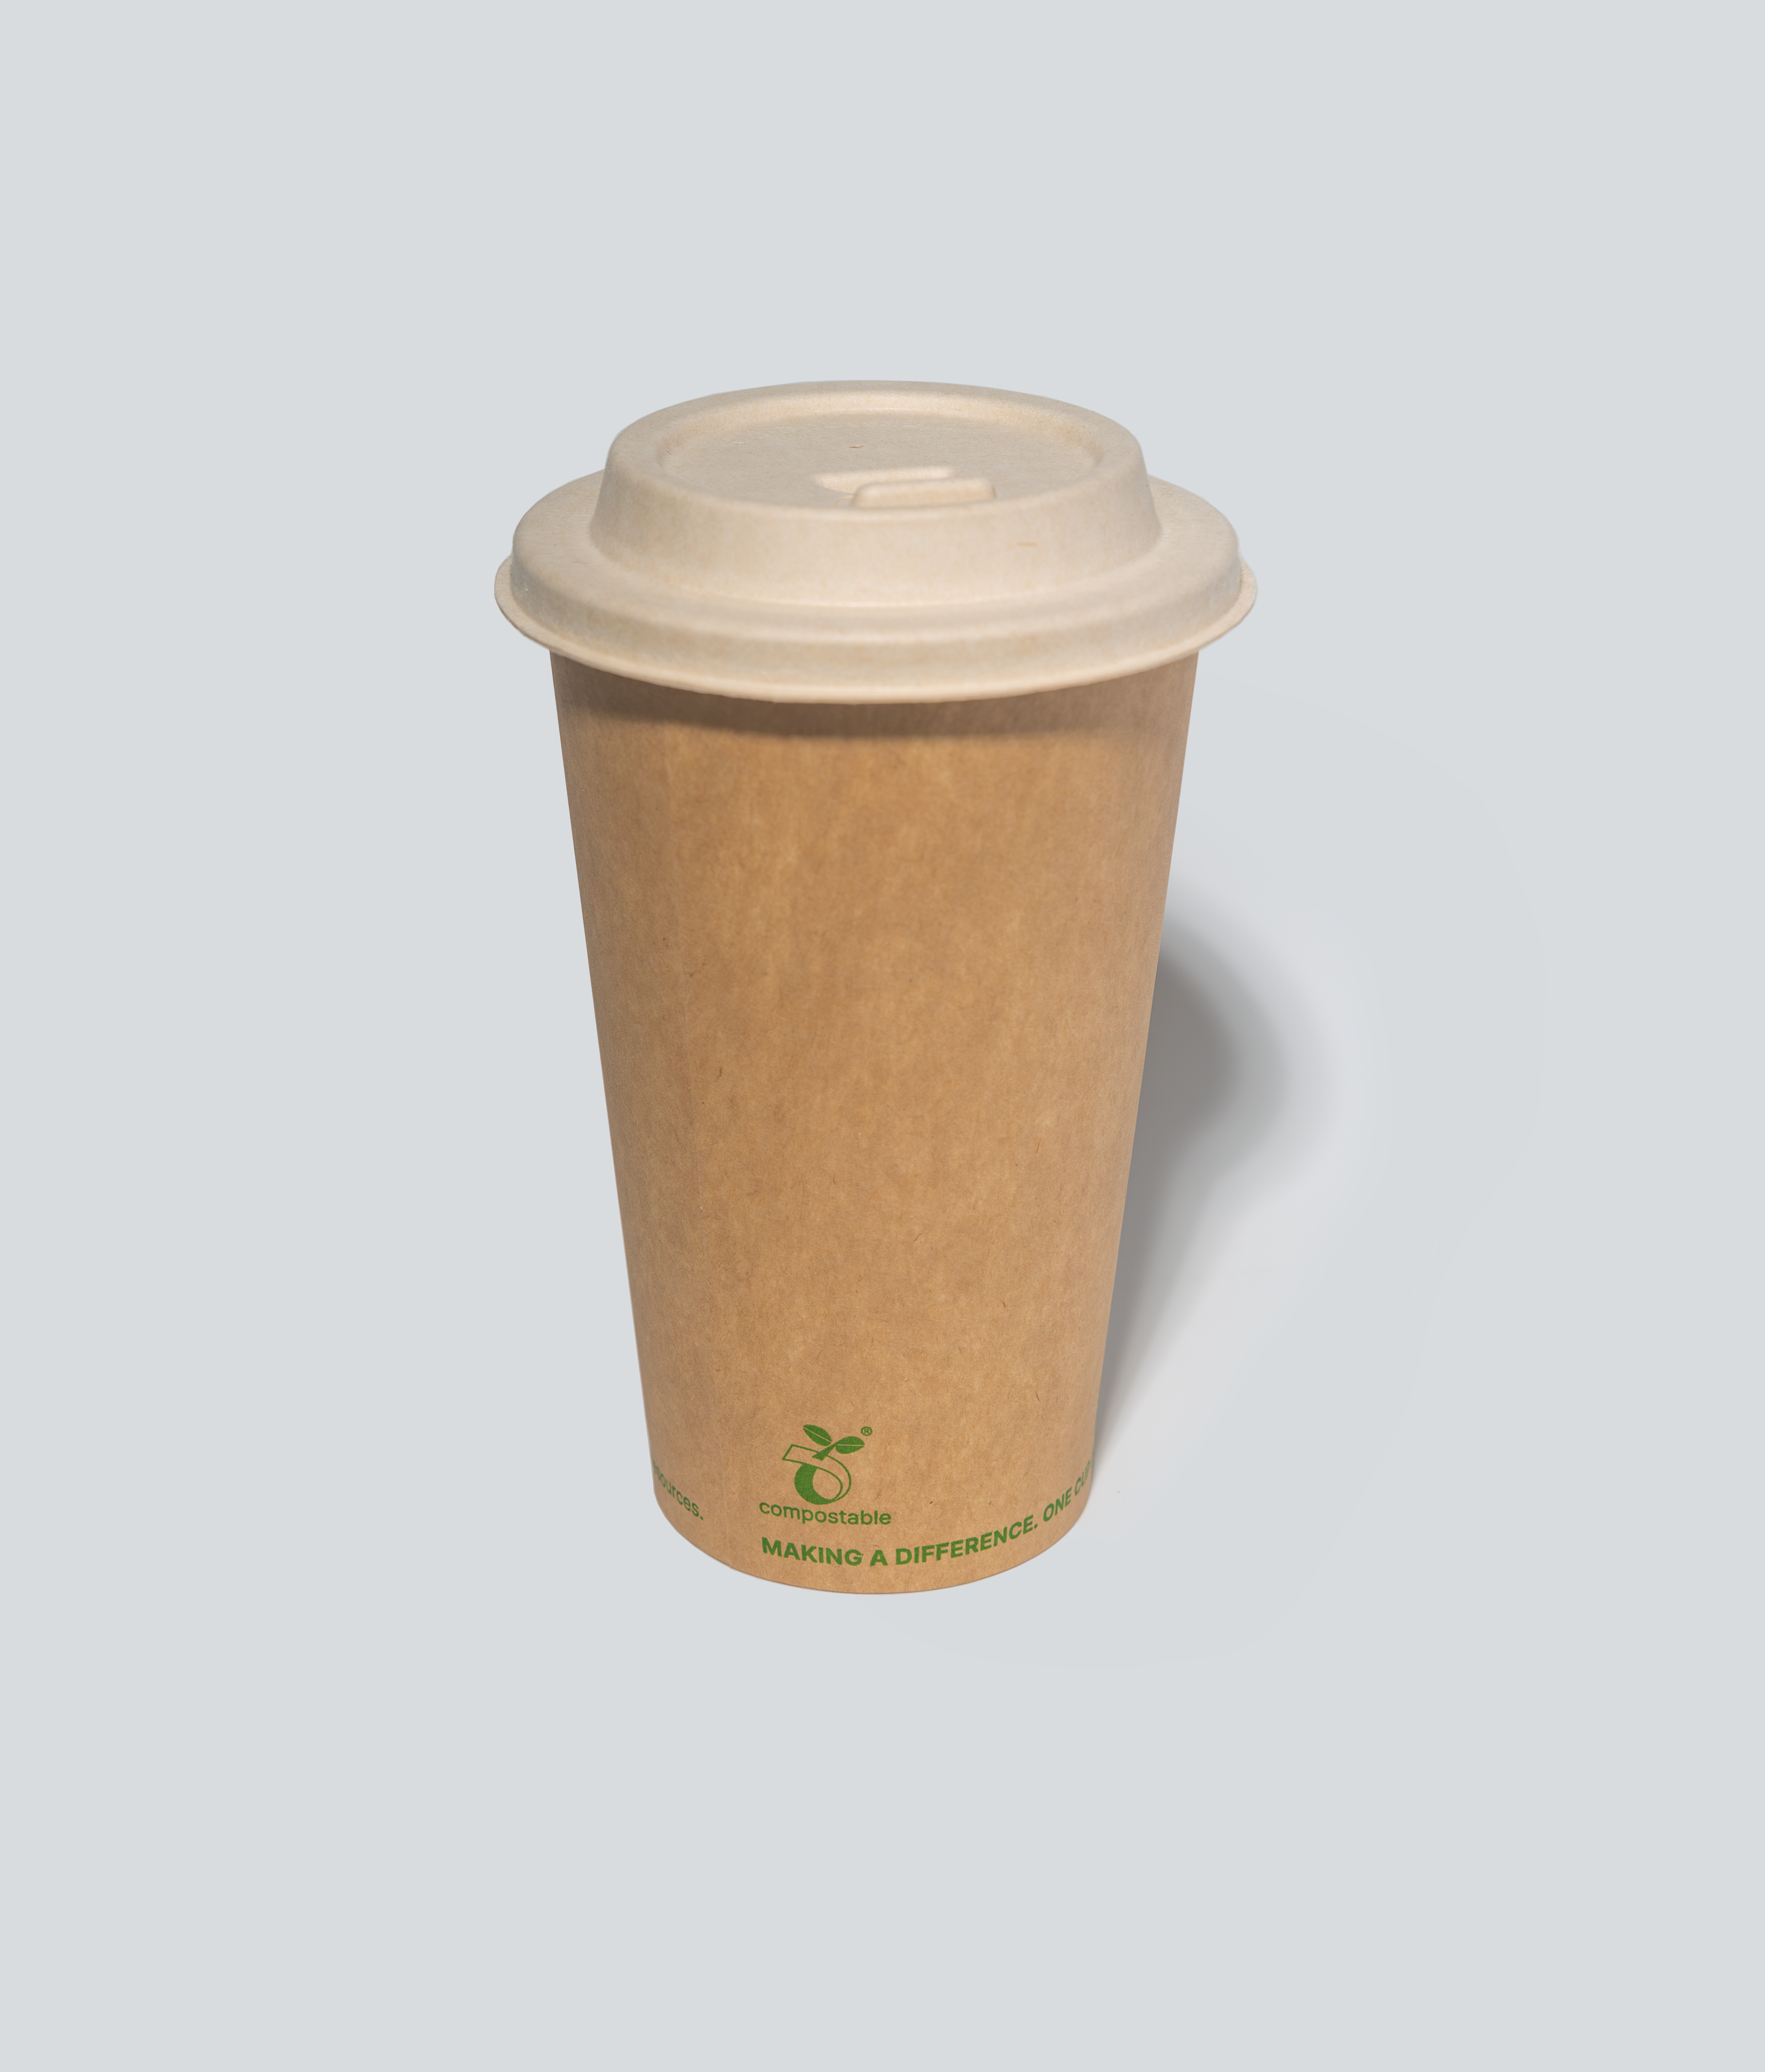 MOSS 16oz compostable plant-based cup Philippines